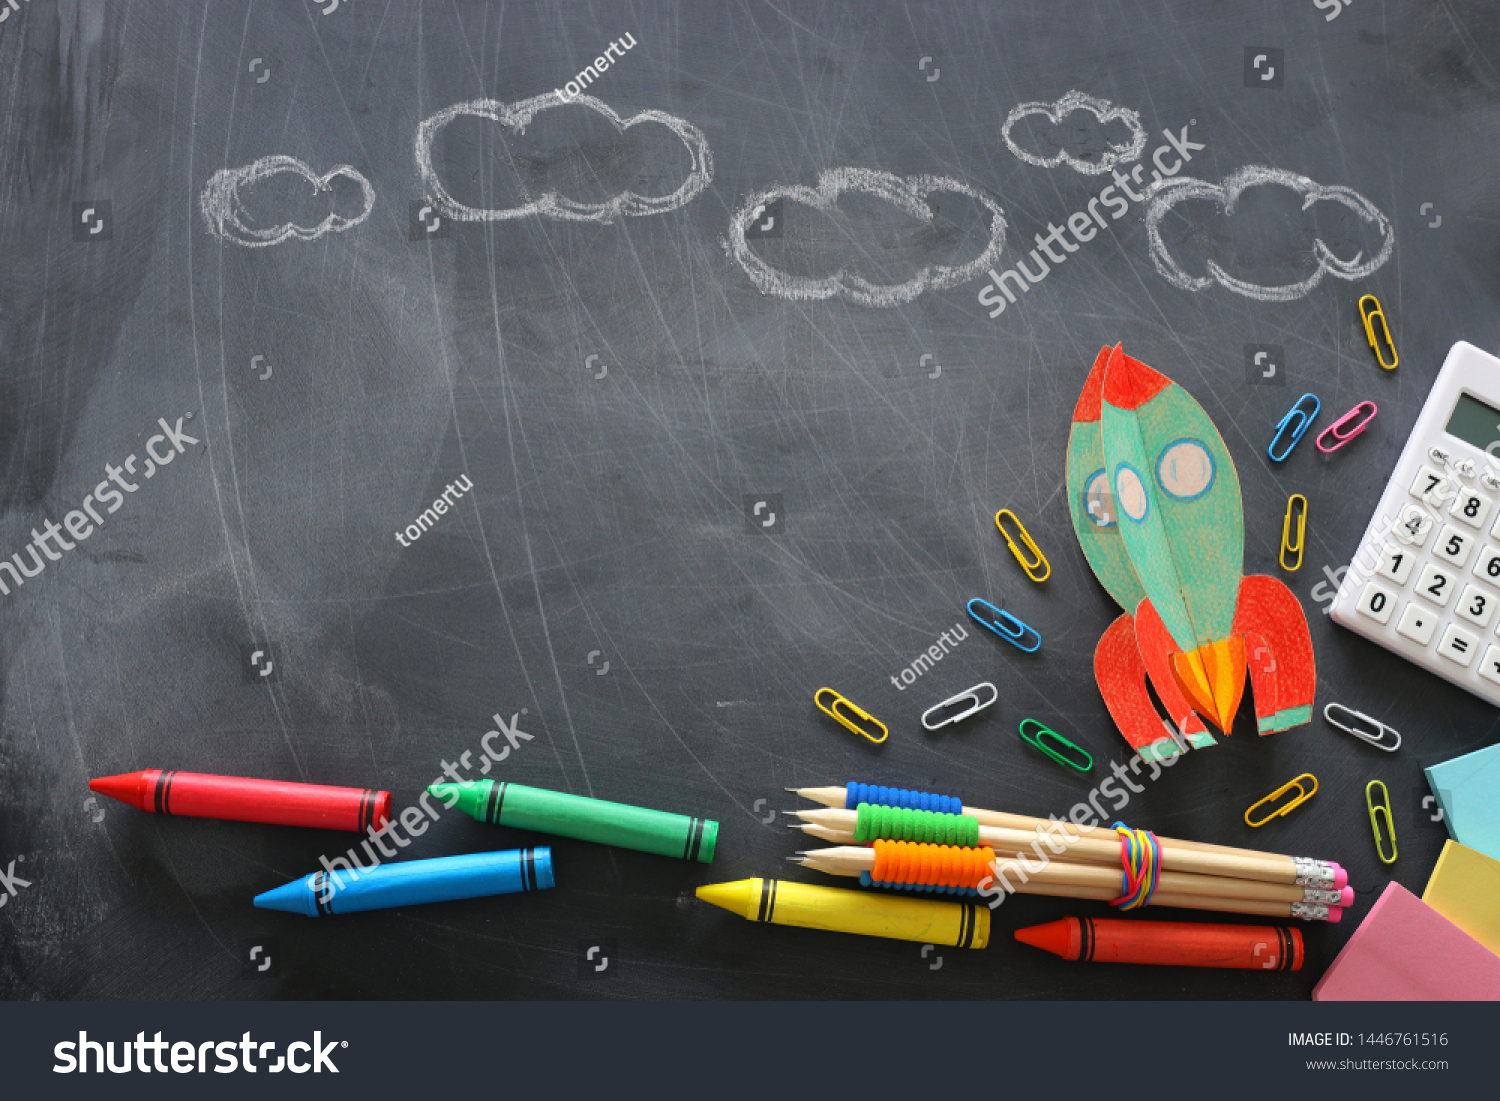 education. Back to school concept. rocket cut from paper and painted over blackboard background. top view, flat lay #1446761516